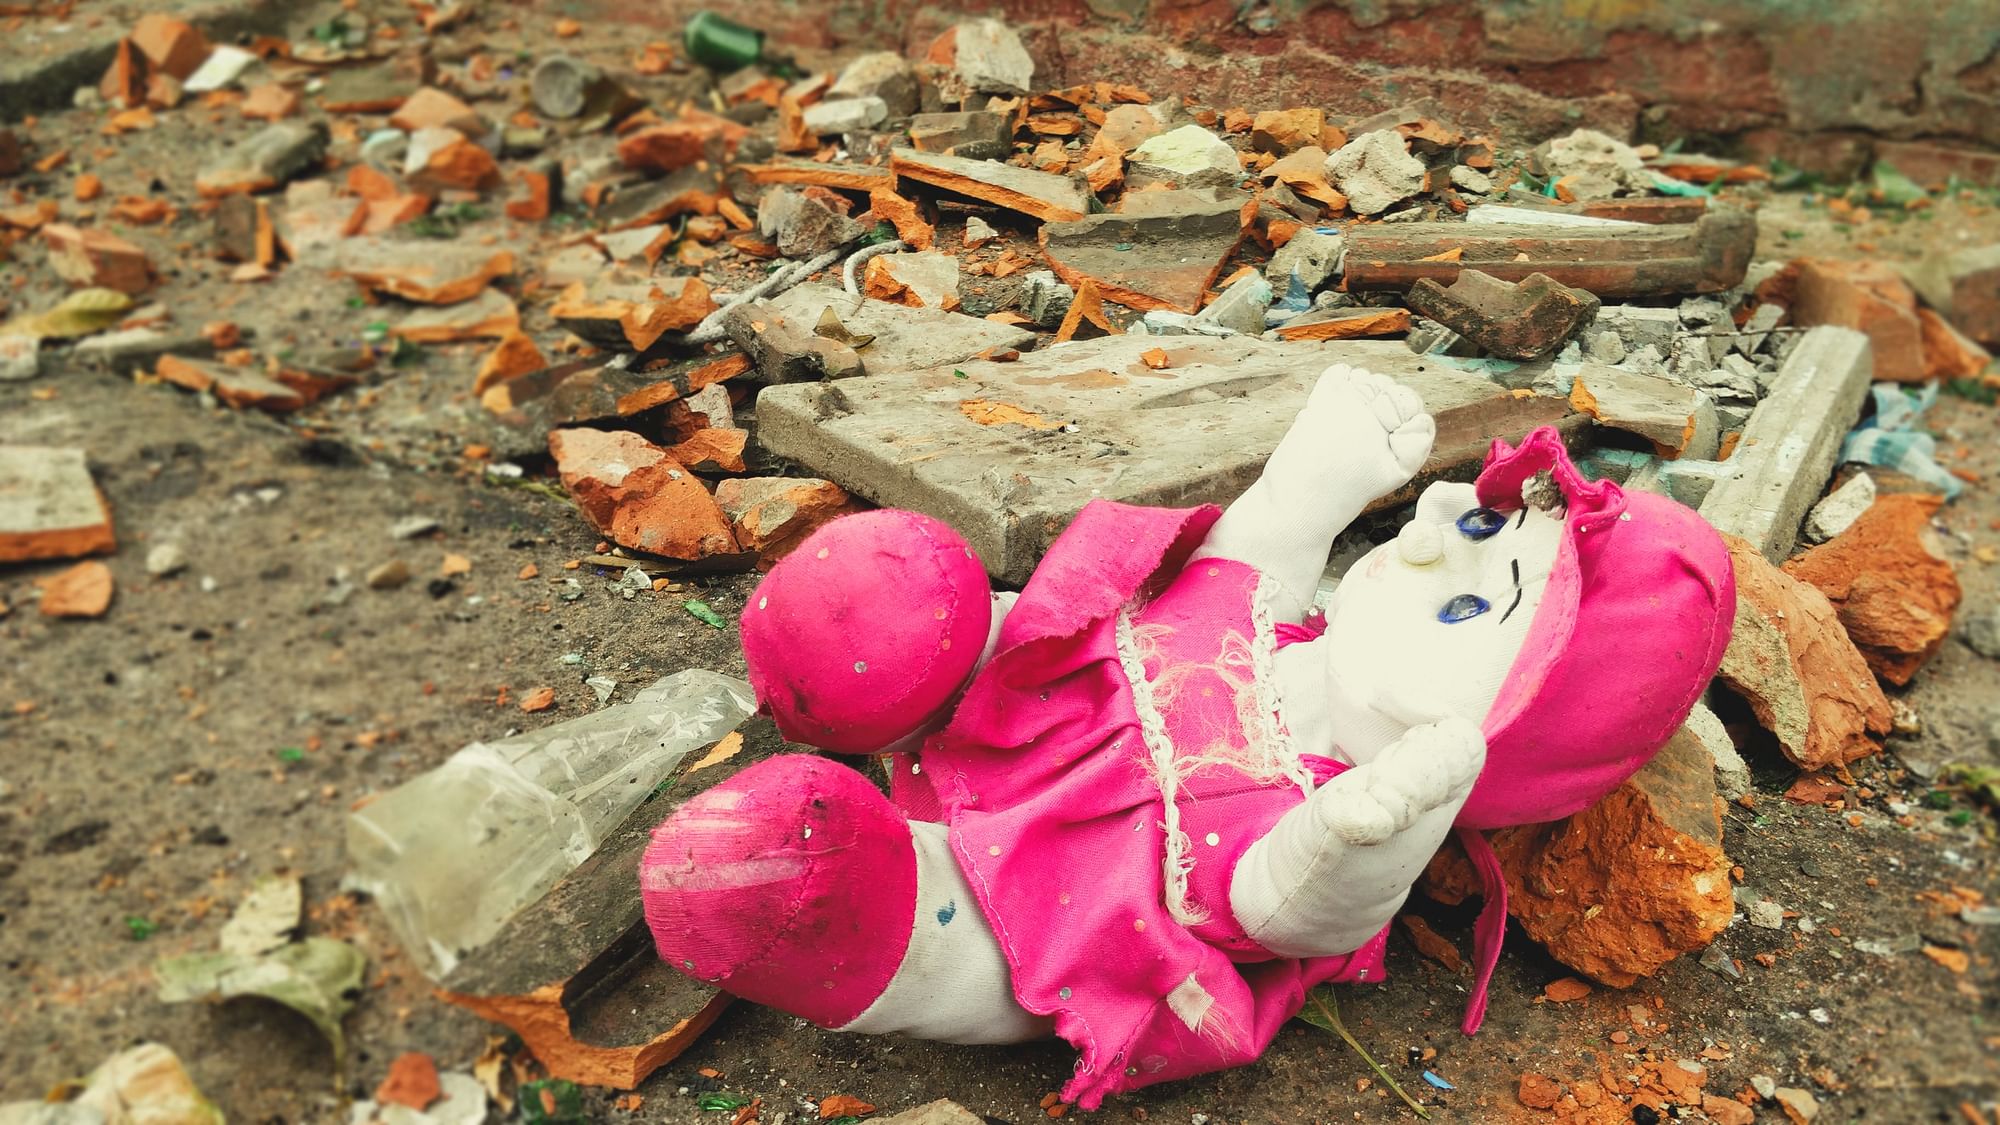 A forgotten doll lies amidst broken bricks and shards of glass at the site of violence in at a locality called Telinipara in West Bengal's Hooghly district.